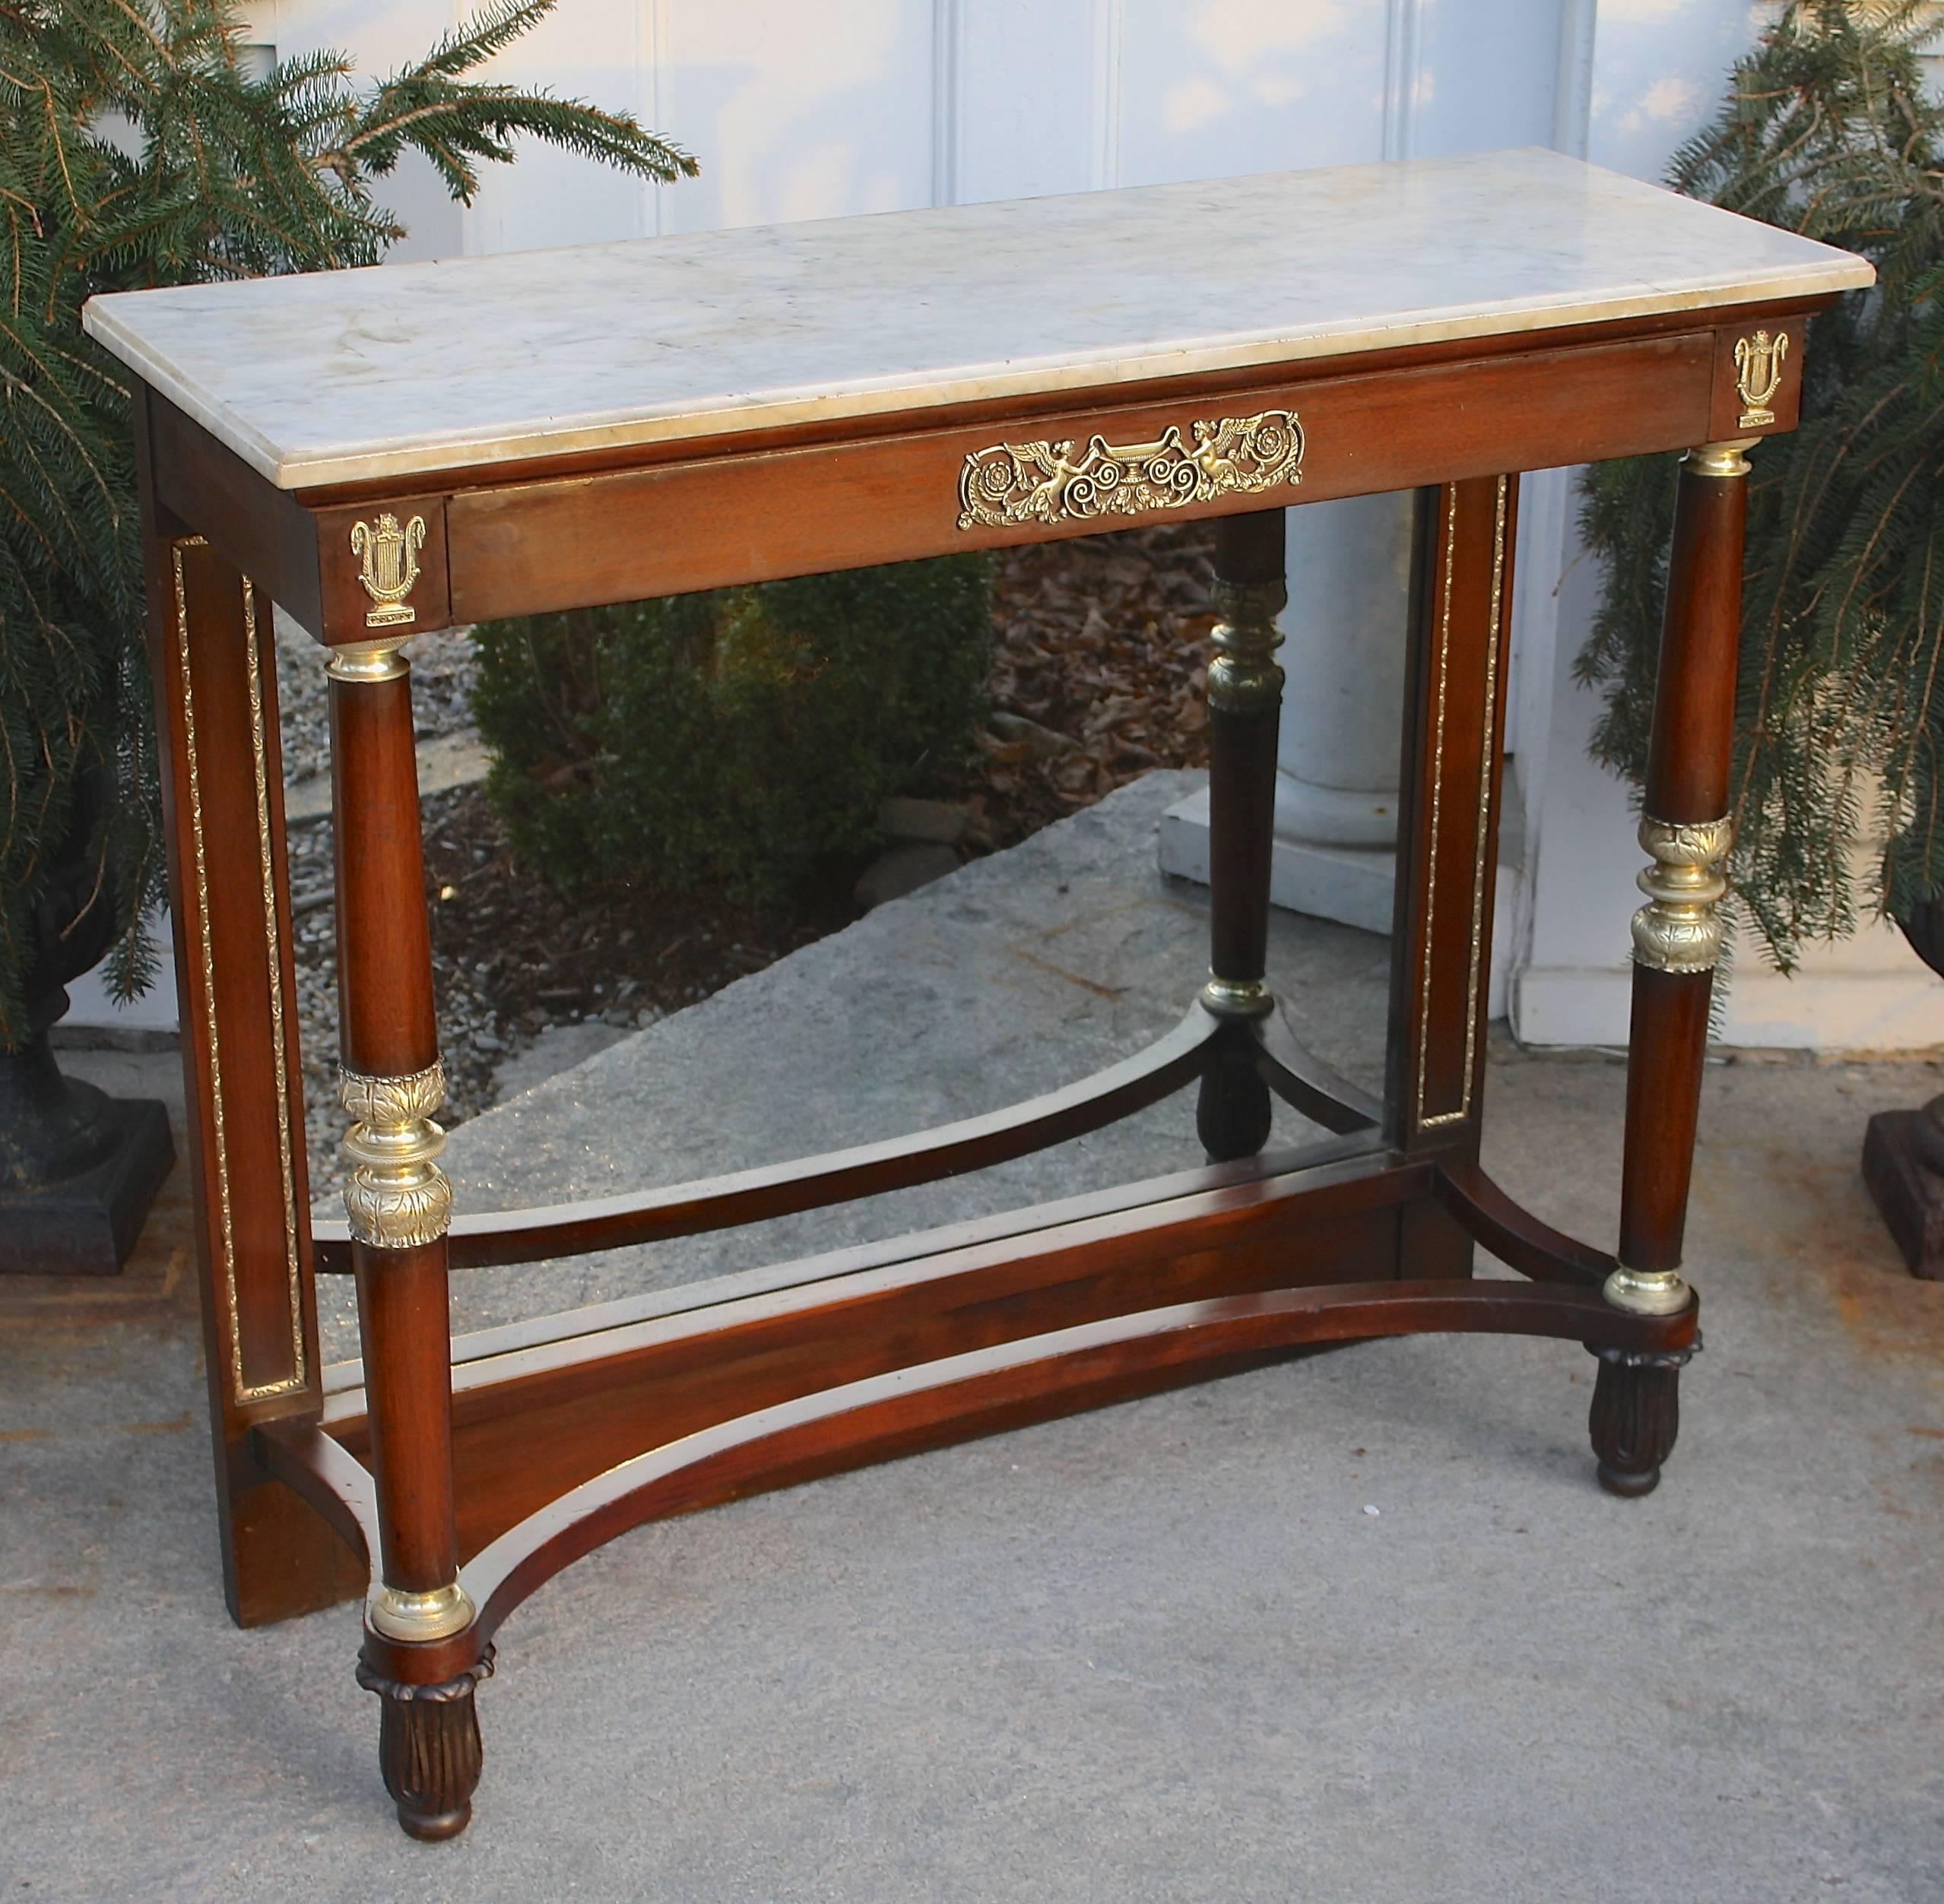 A French Restauration period marble-top mahogany pier table with exceptionally fine ormolu mounts of harpies and lyres to its apron. Three turned ormolu elements on the frontal columns; including three-tiered complex foliate turnings midway on each.